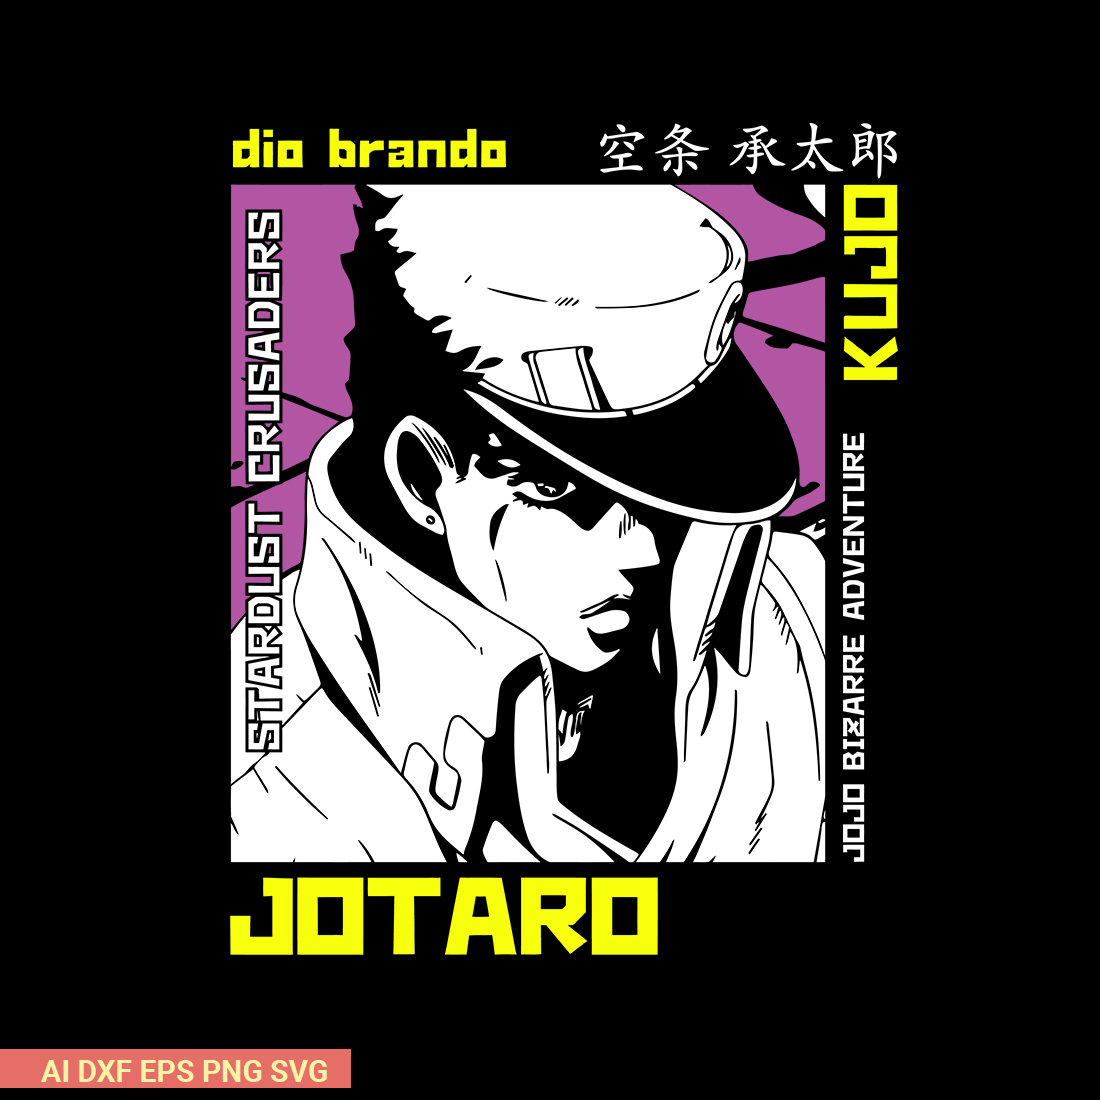 Jotaro poster Embroidery Design, Jojo Embroidery, Embroidery File, Anime Embroidery, Anime shirt, Digital download preview image.